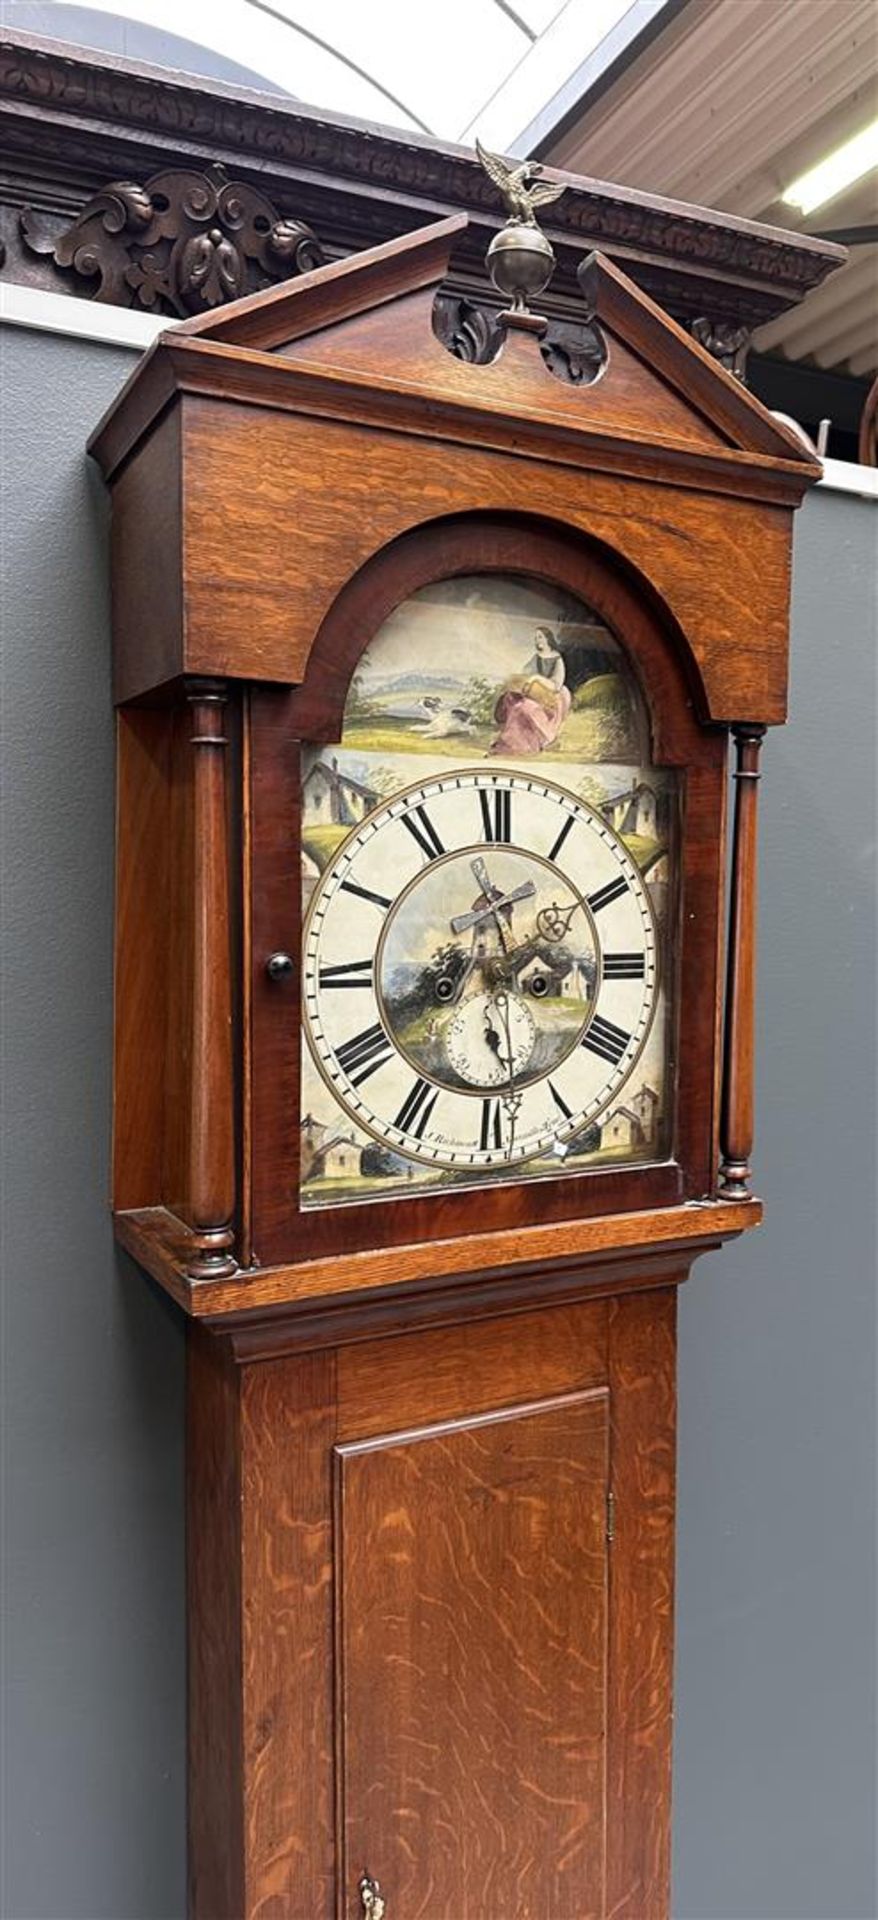 An English, so-called "Grandfather clock". Address: "J. Richmond / New Casttle".  - Image 5 of 7